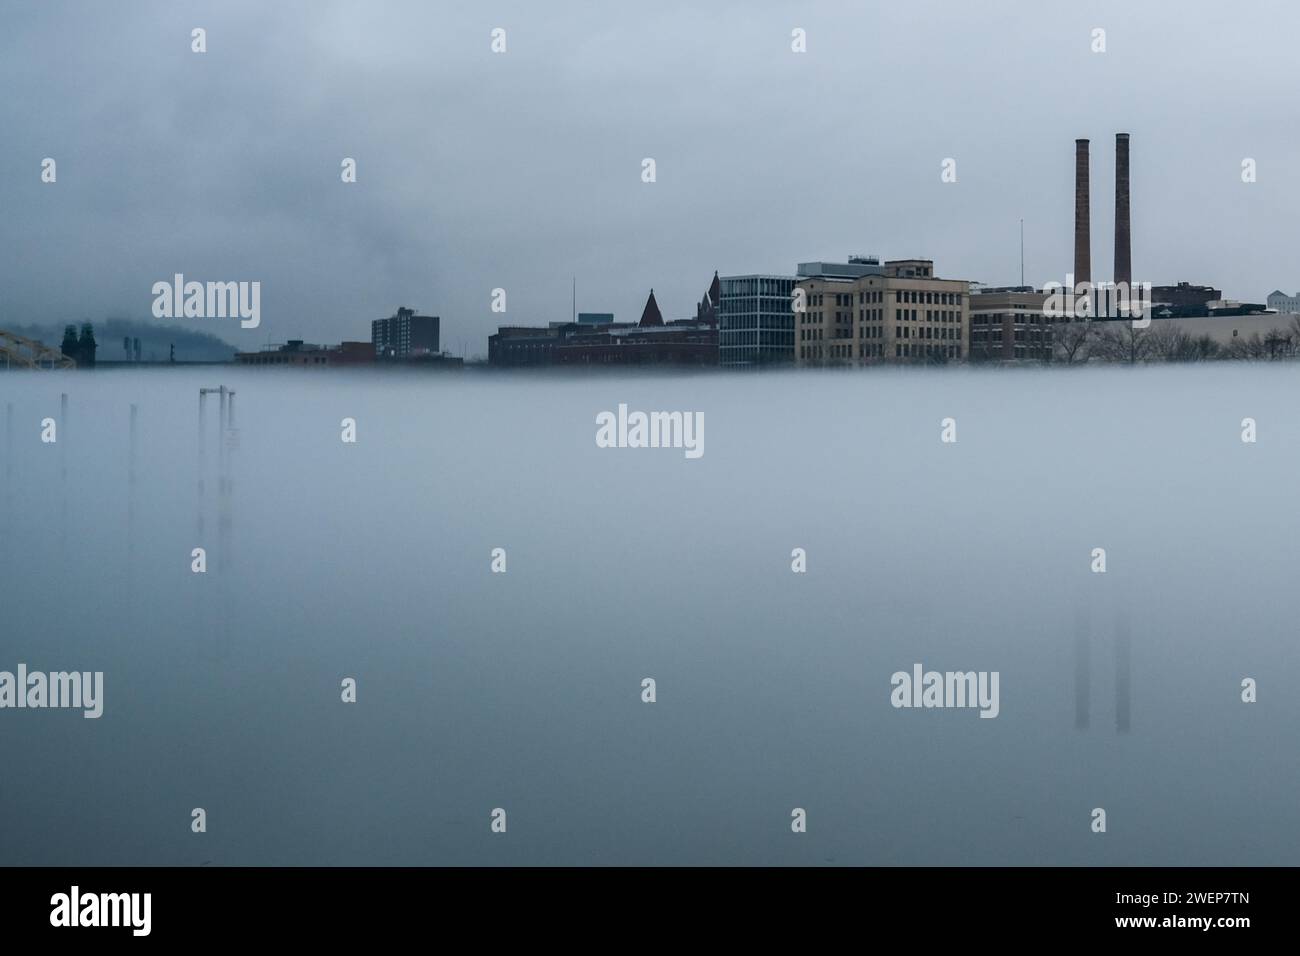 Morning fog on the Allegheny River. The Heinz smokestacks are visible in the background. Stock Photo